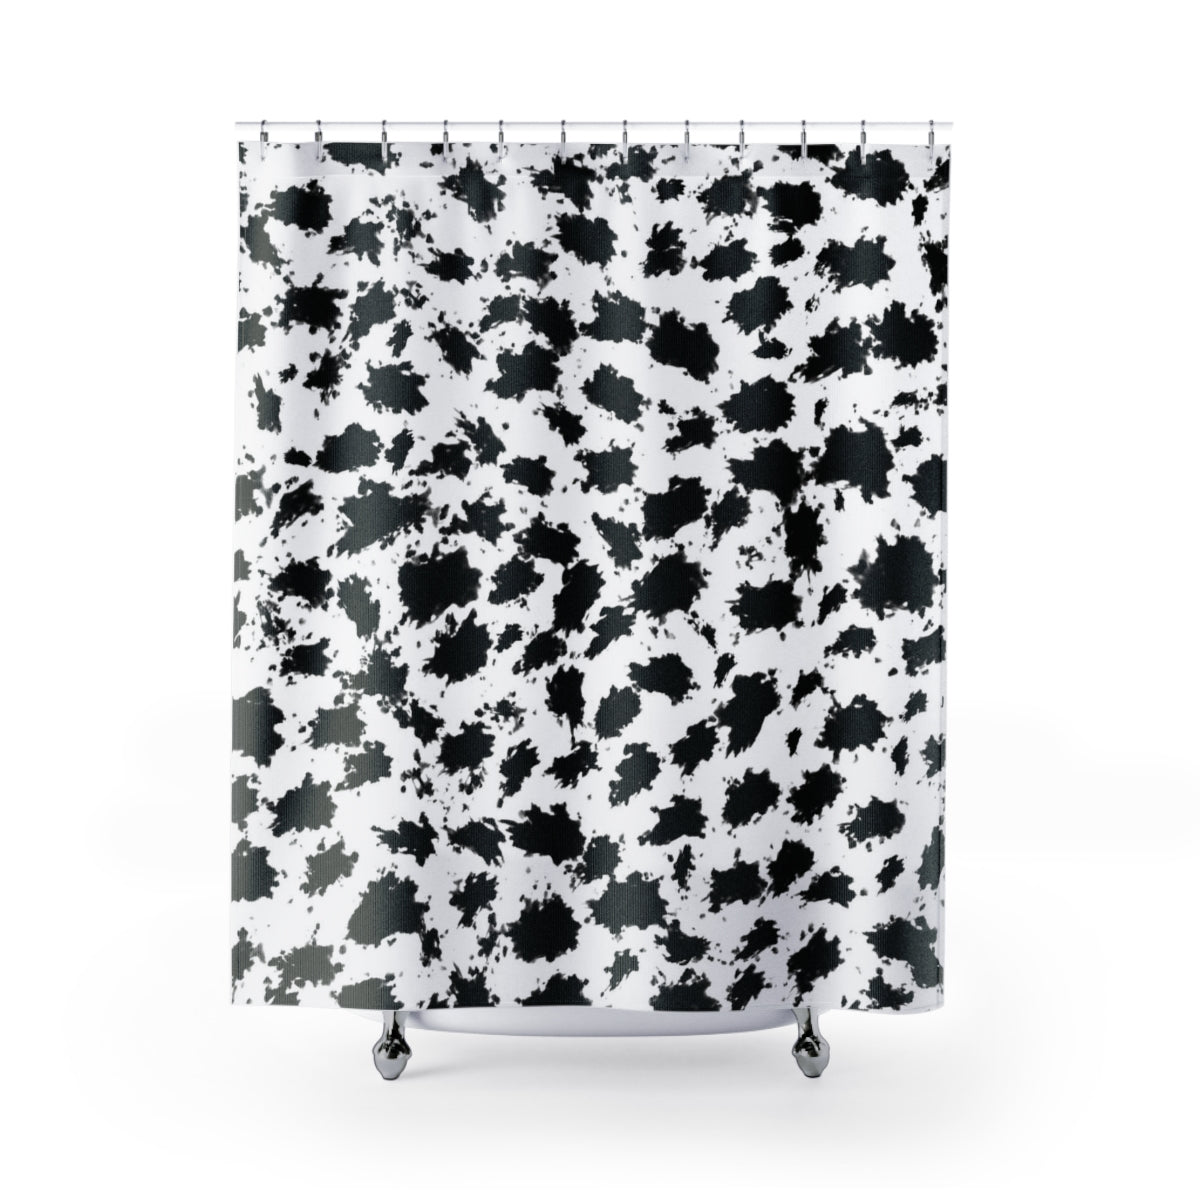 Black and White Snow Leopard Print Shower Curtain